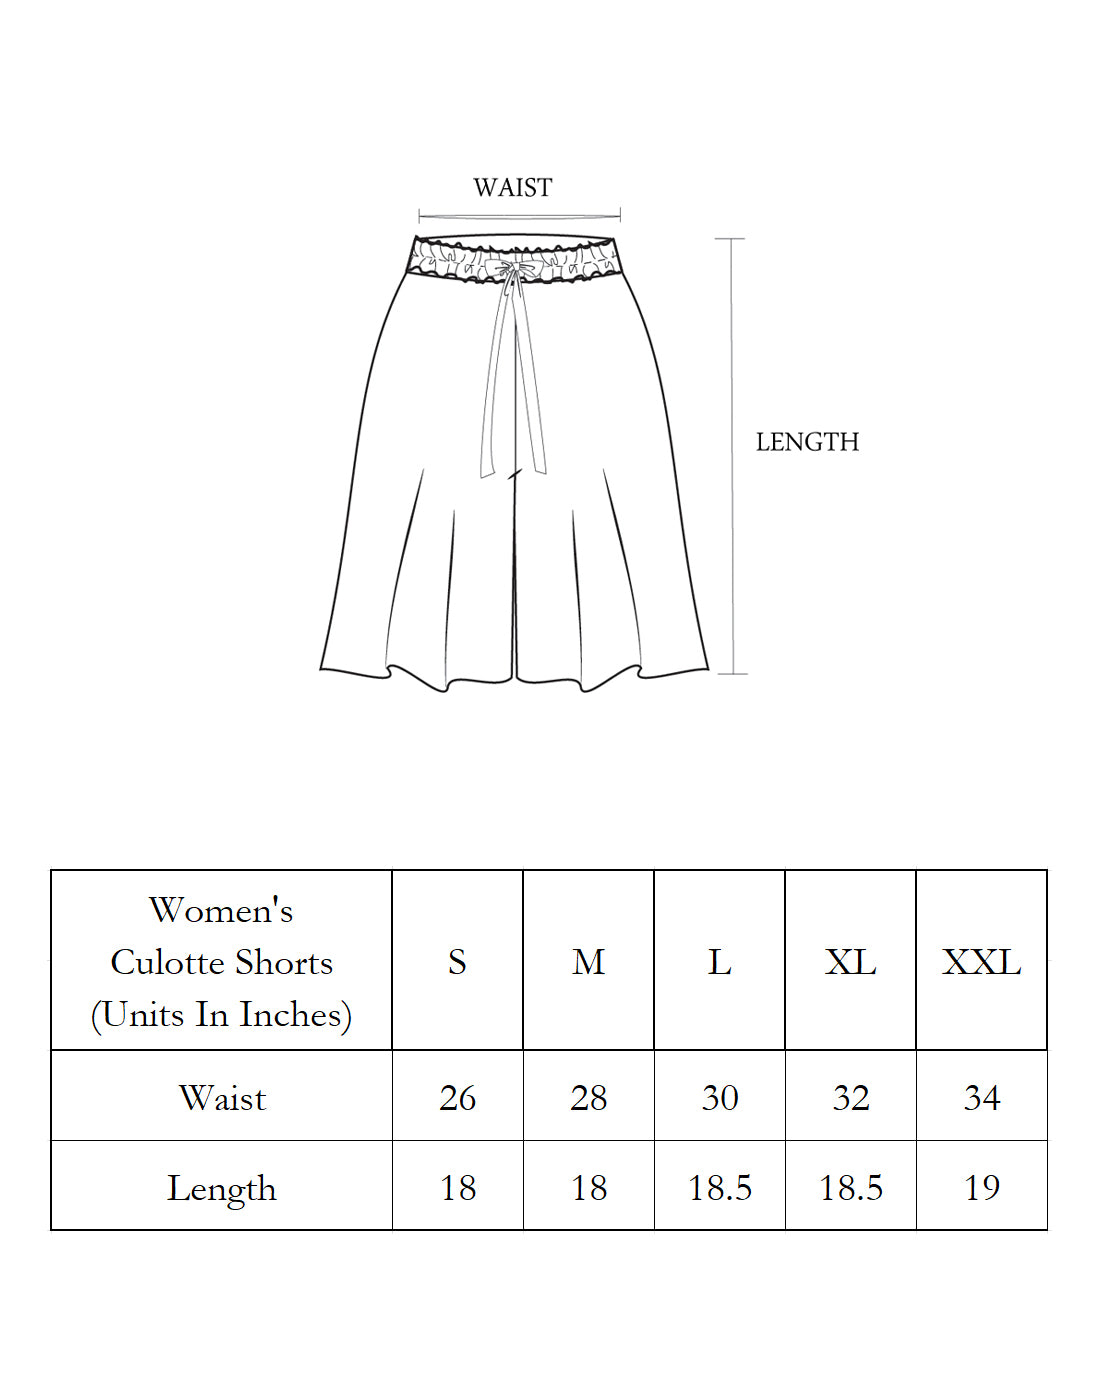 Culottes Shorts for Women-Mustard Print